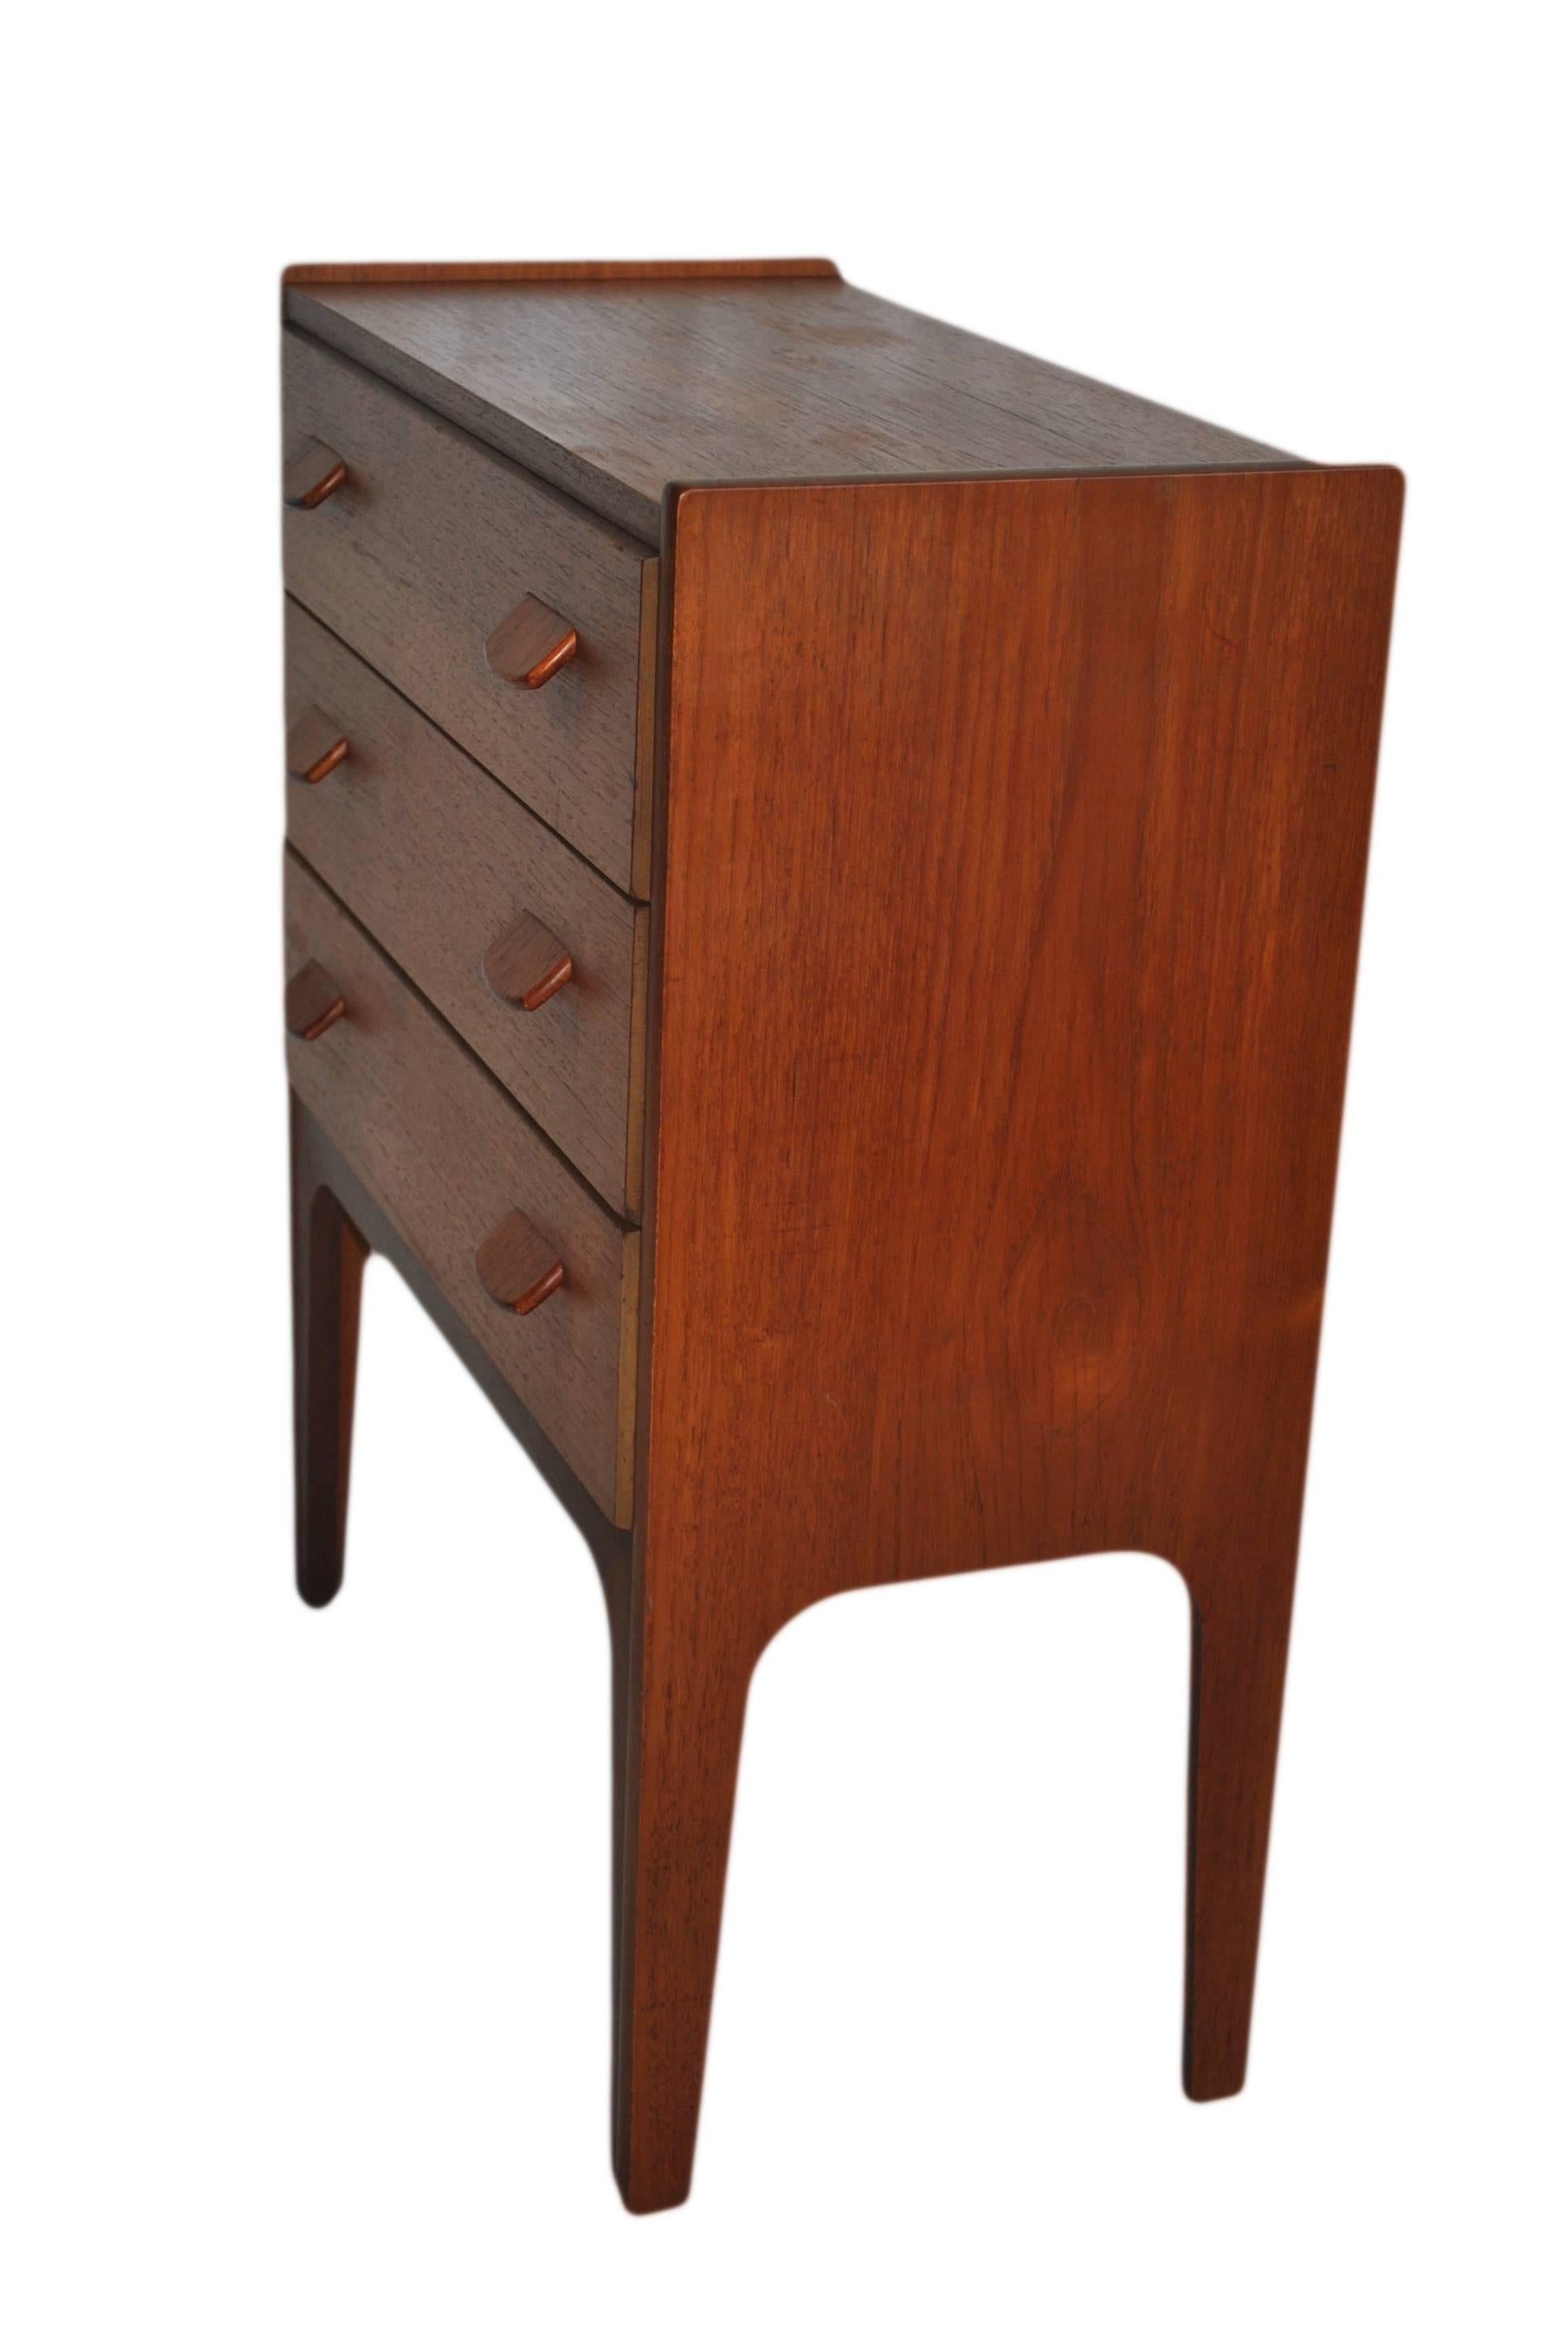 Teak Danish Chest of Drawers by Poul Volther